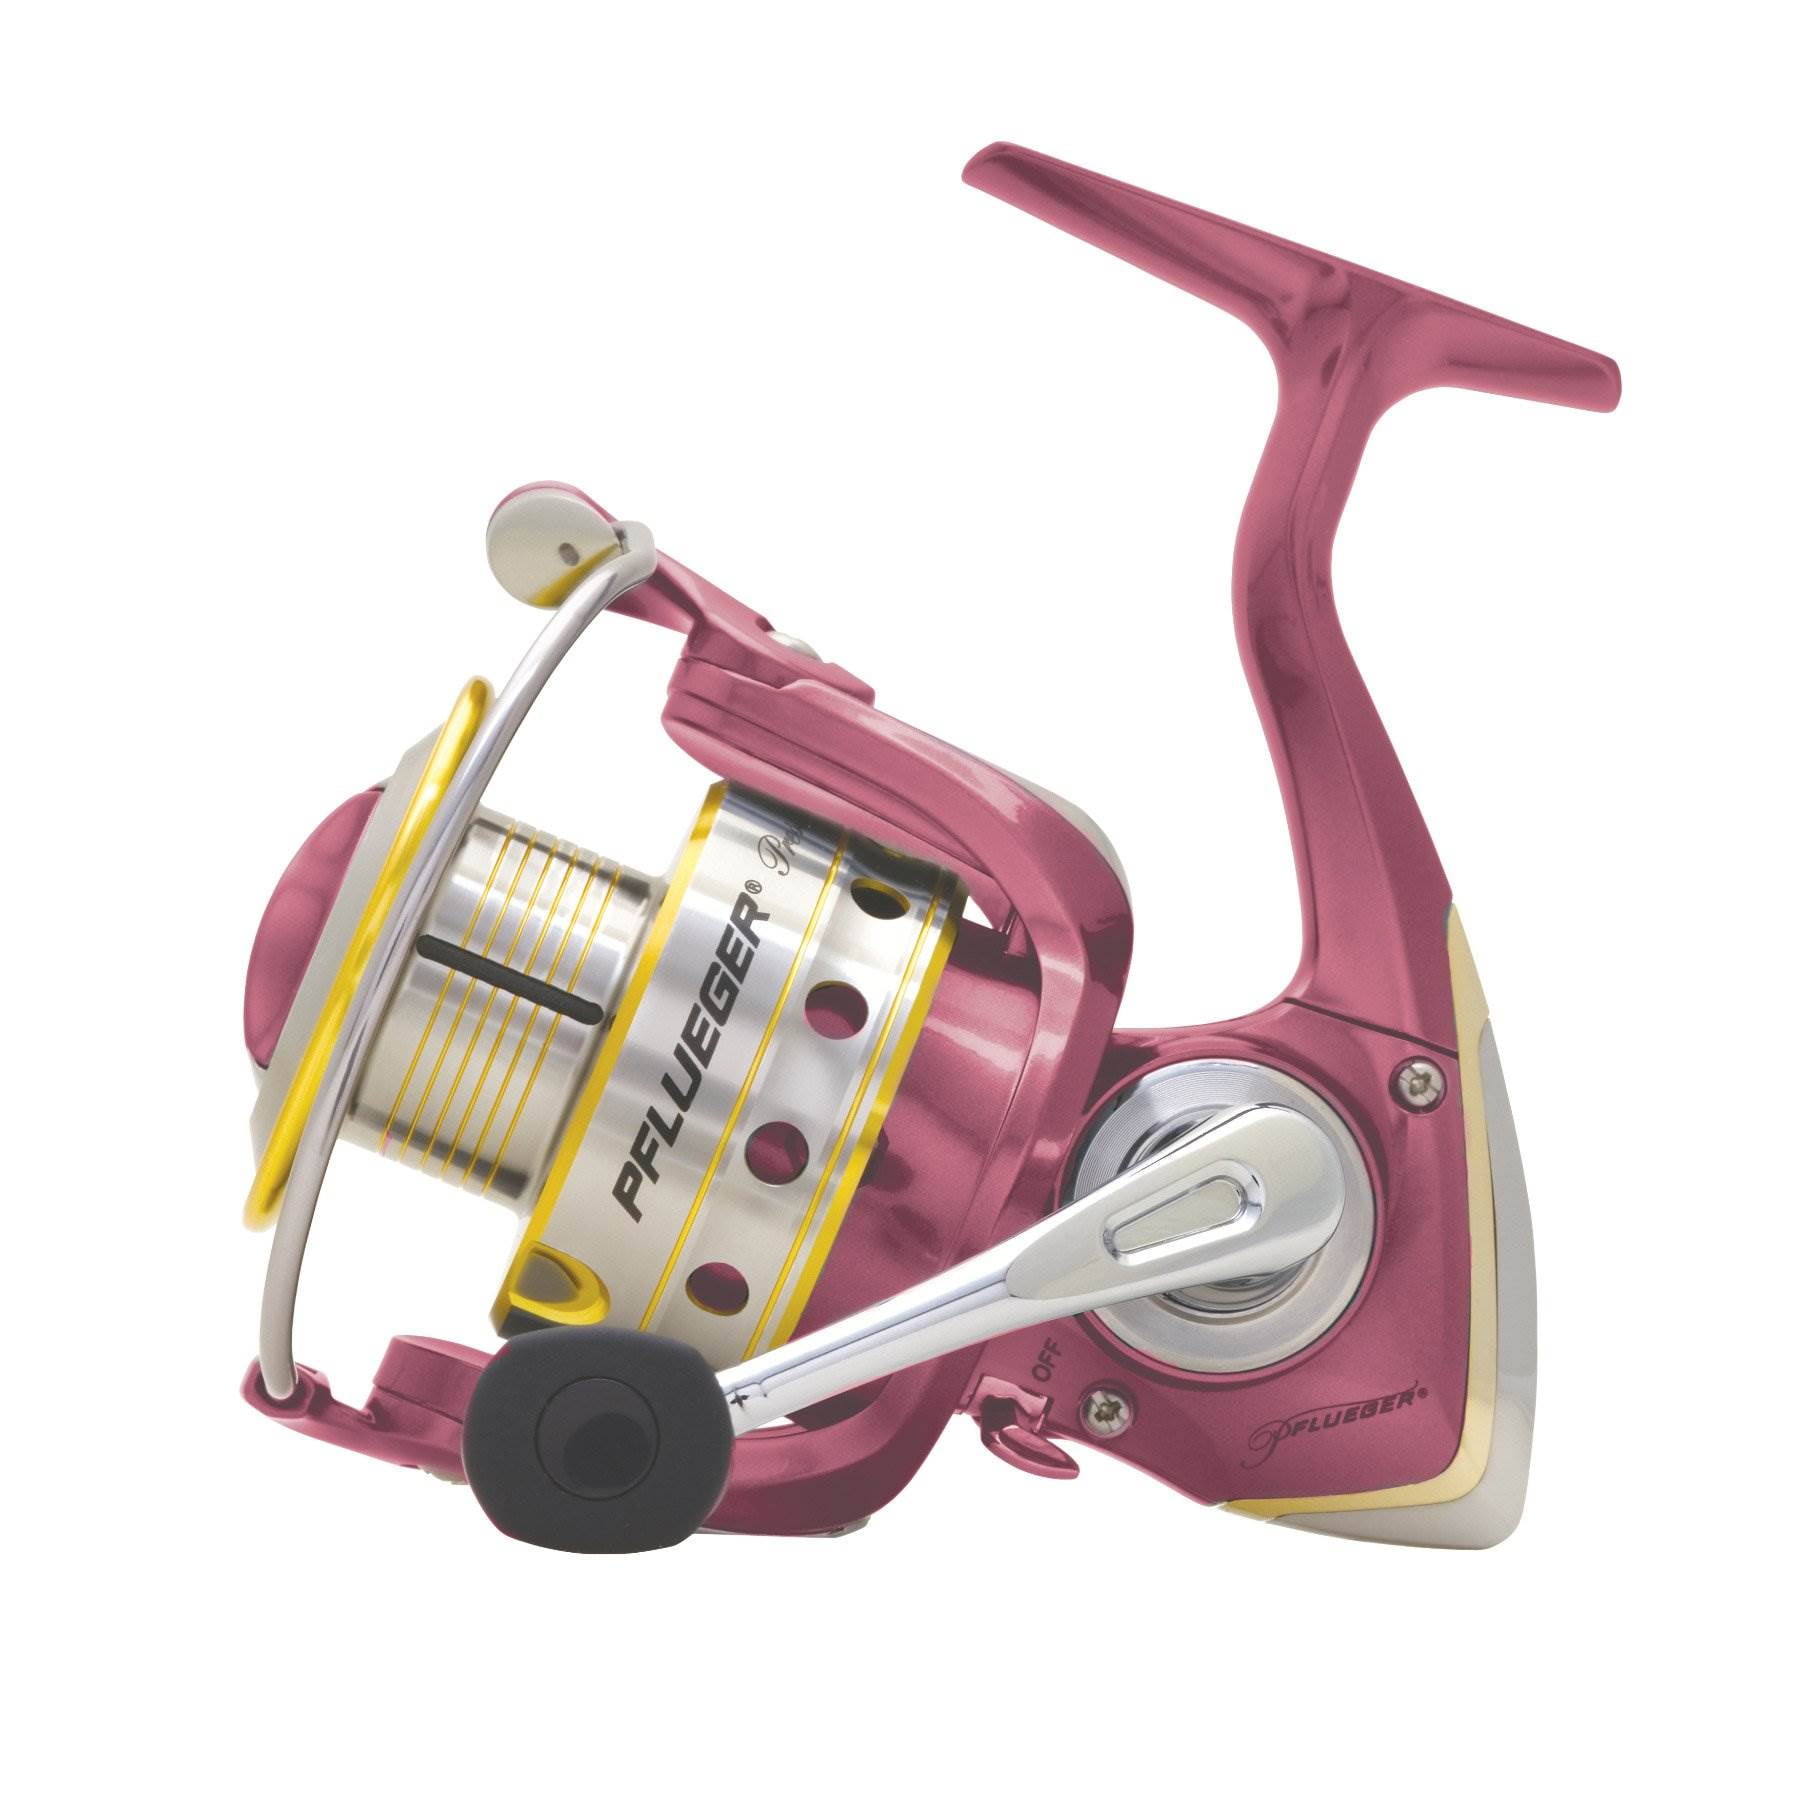 The George F Ball Free Flo spinning reel for trigger happy anglers